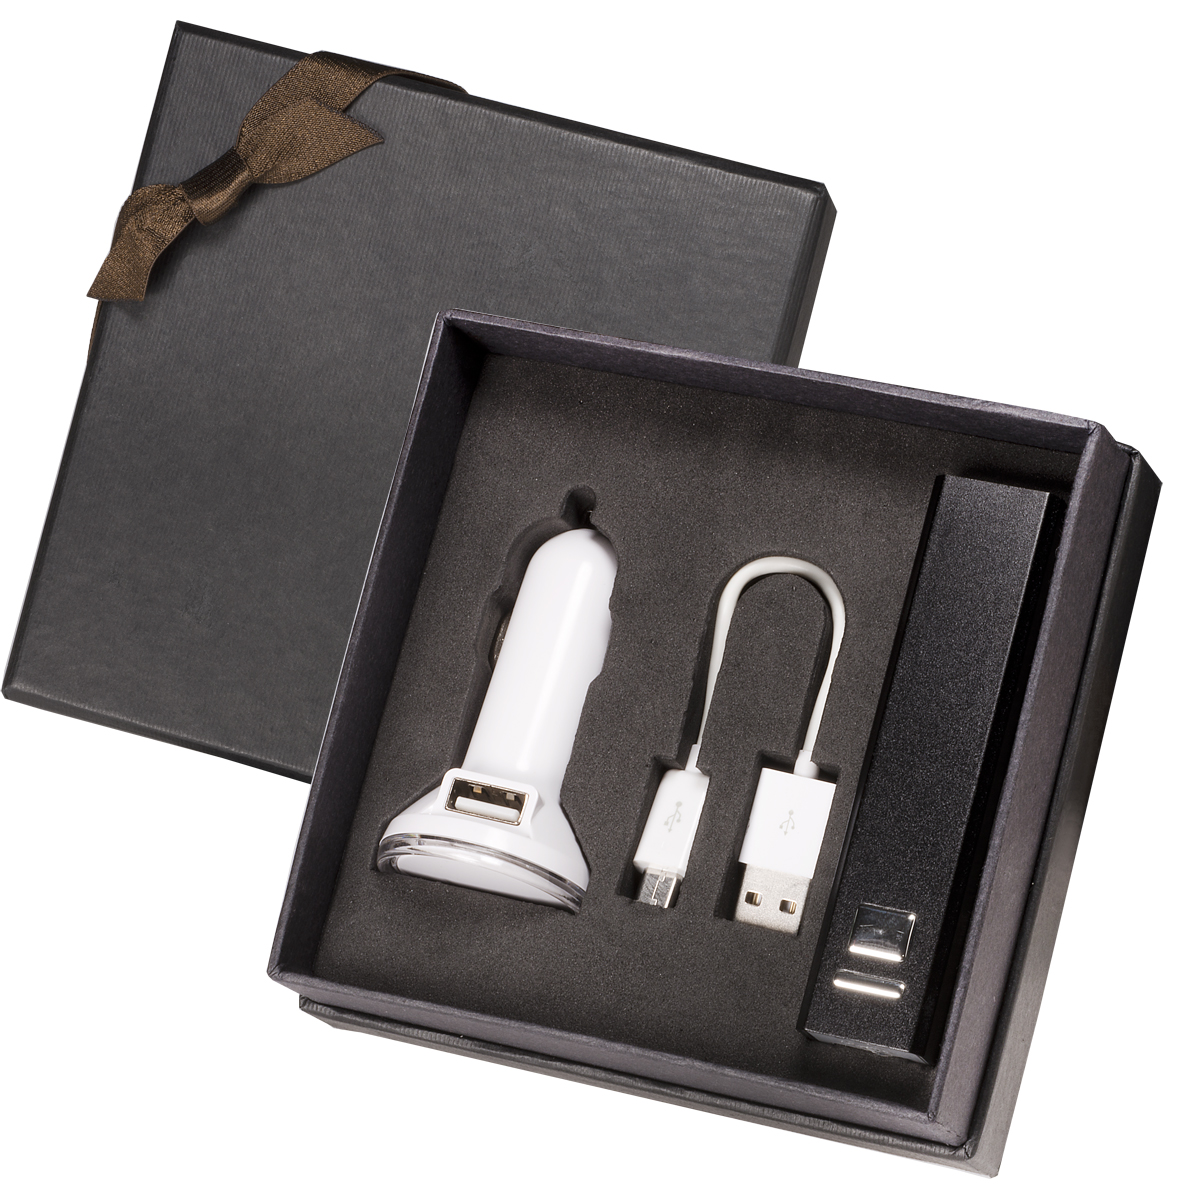 Emergency Chargers Gift Set